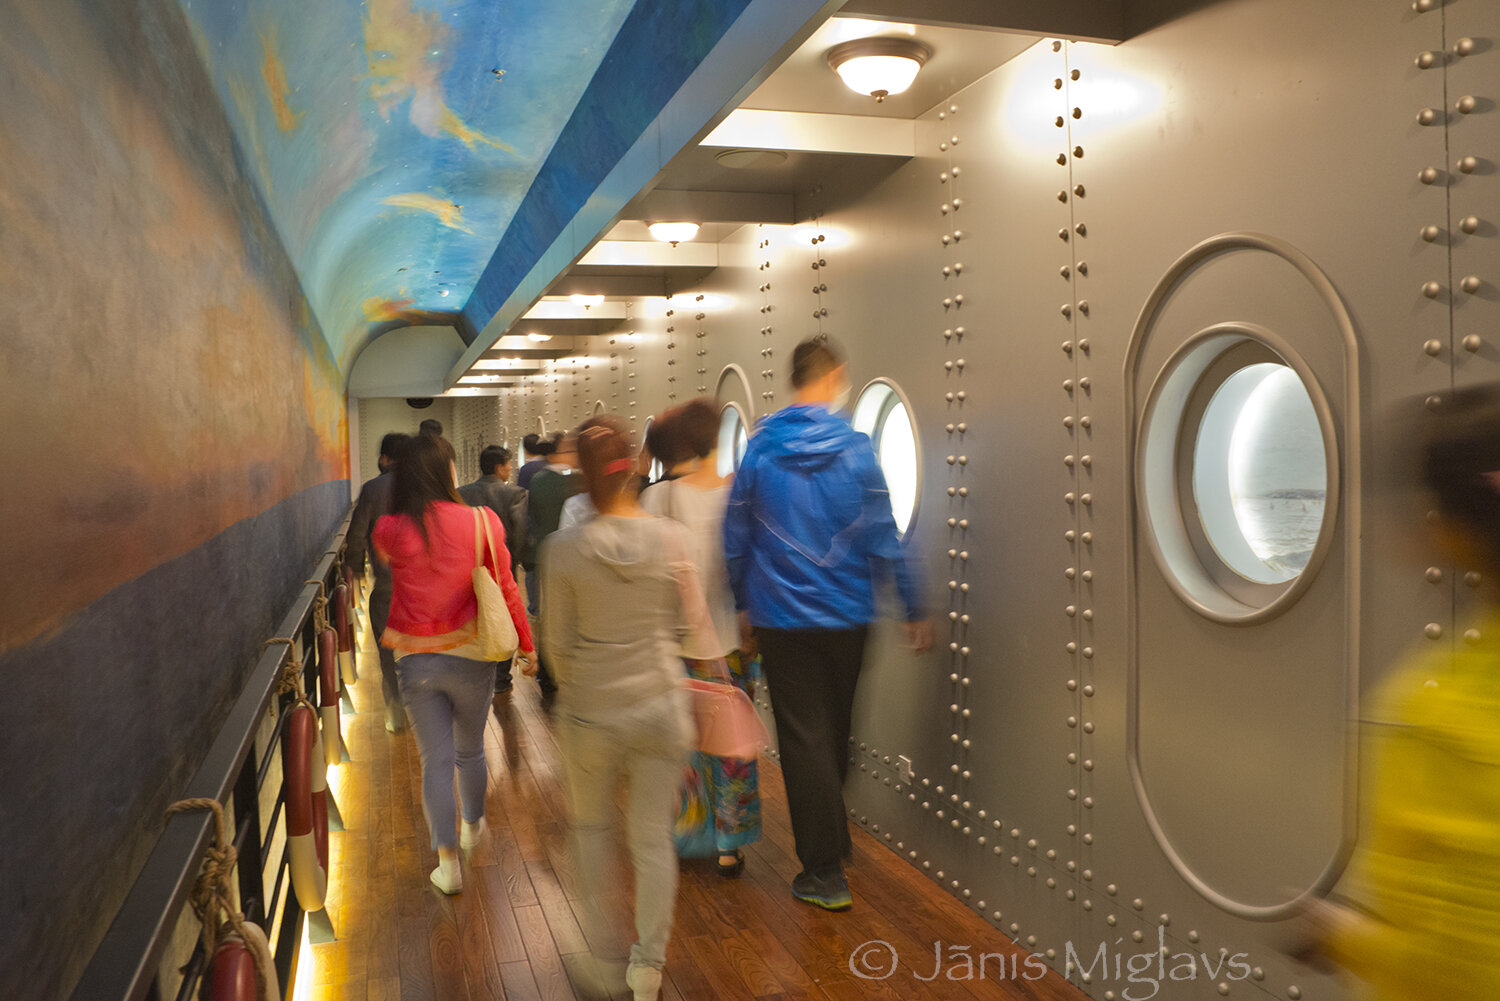 Chinese tourists go through a ship-like hall out of the winery visitor center.